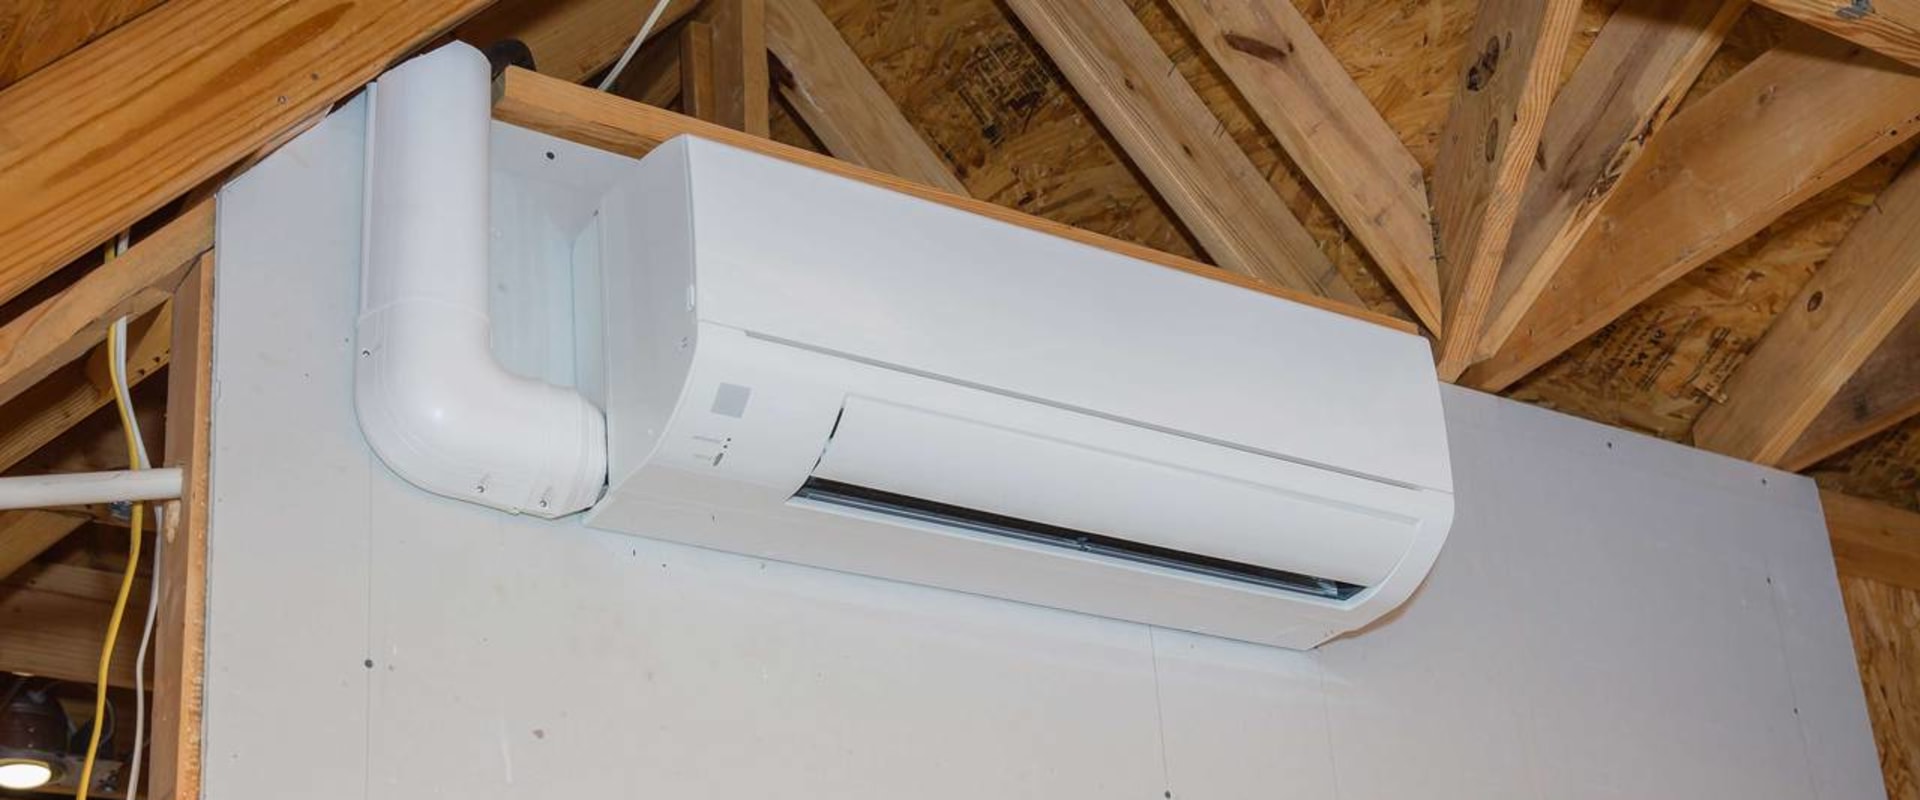 Does a ductless air conditioner need to be on an outside wall?